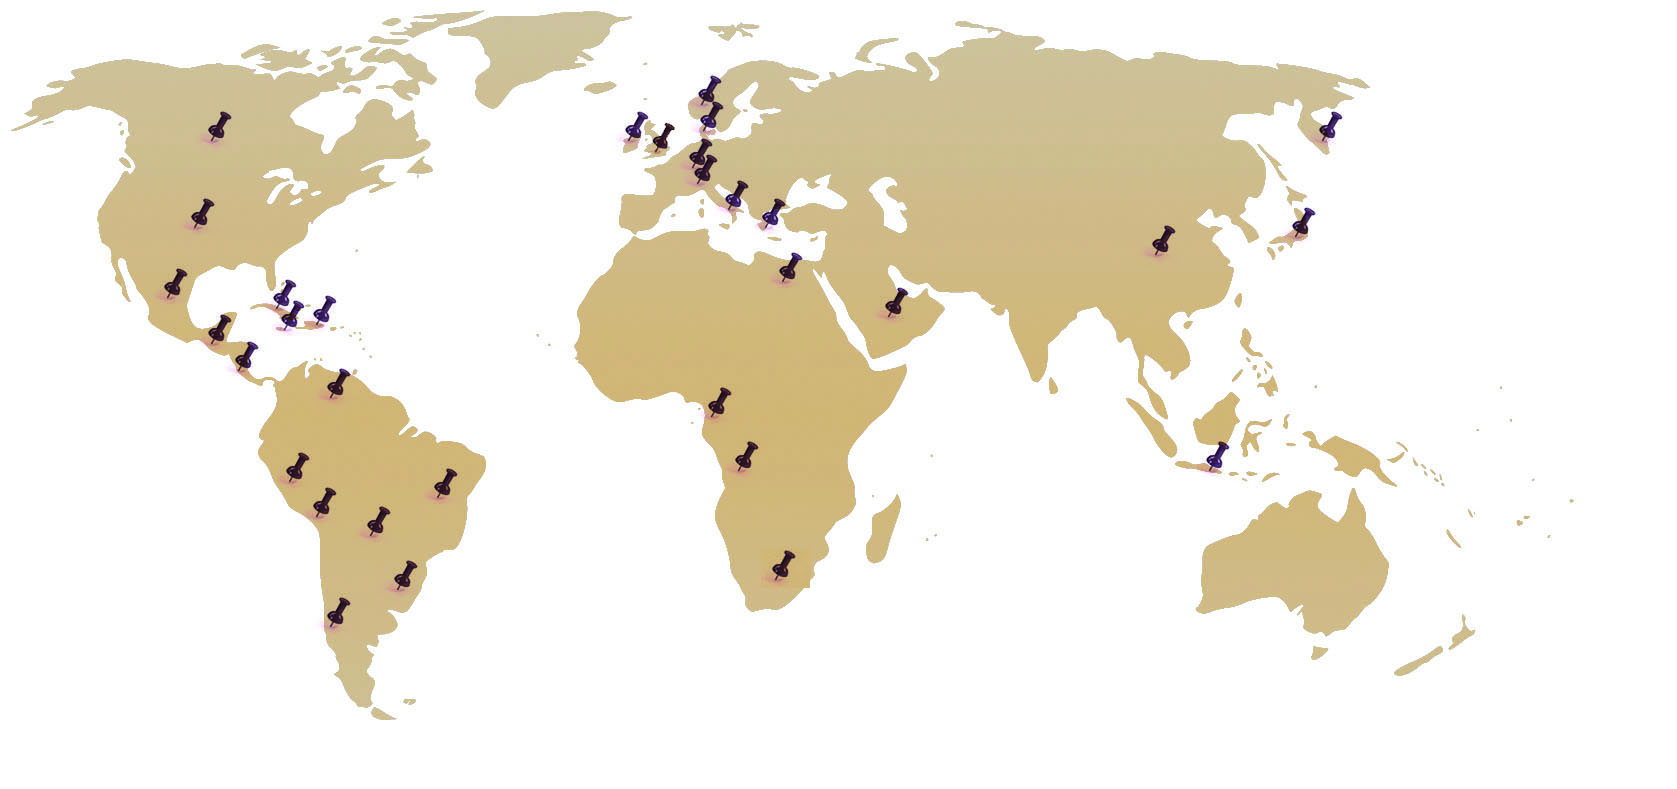 world map with purple pins indicating countries where the Rocky Mountain Lions Eye Bank have provided eye tissues for transplant